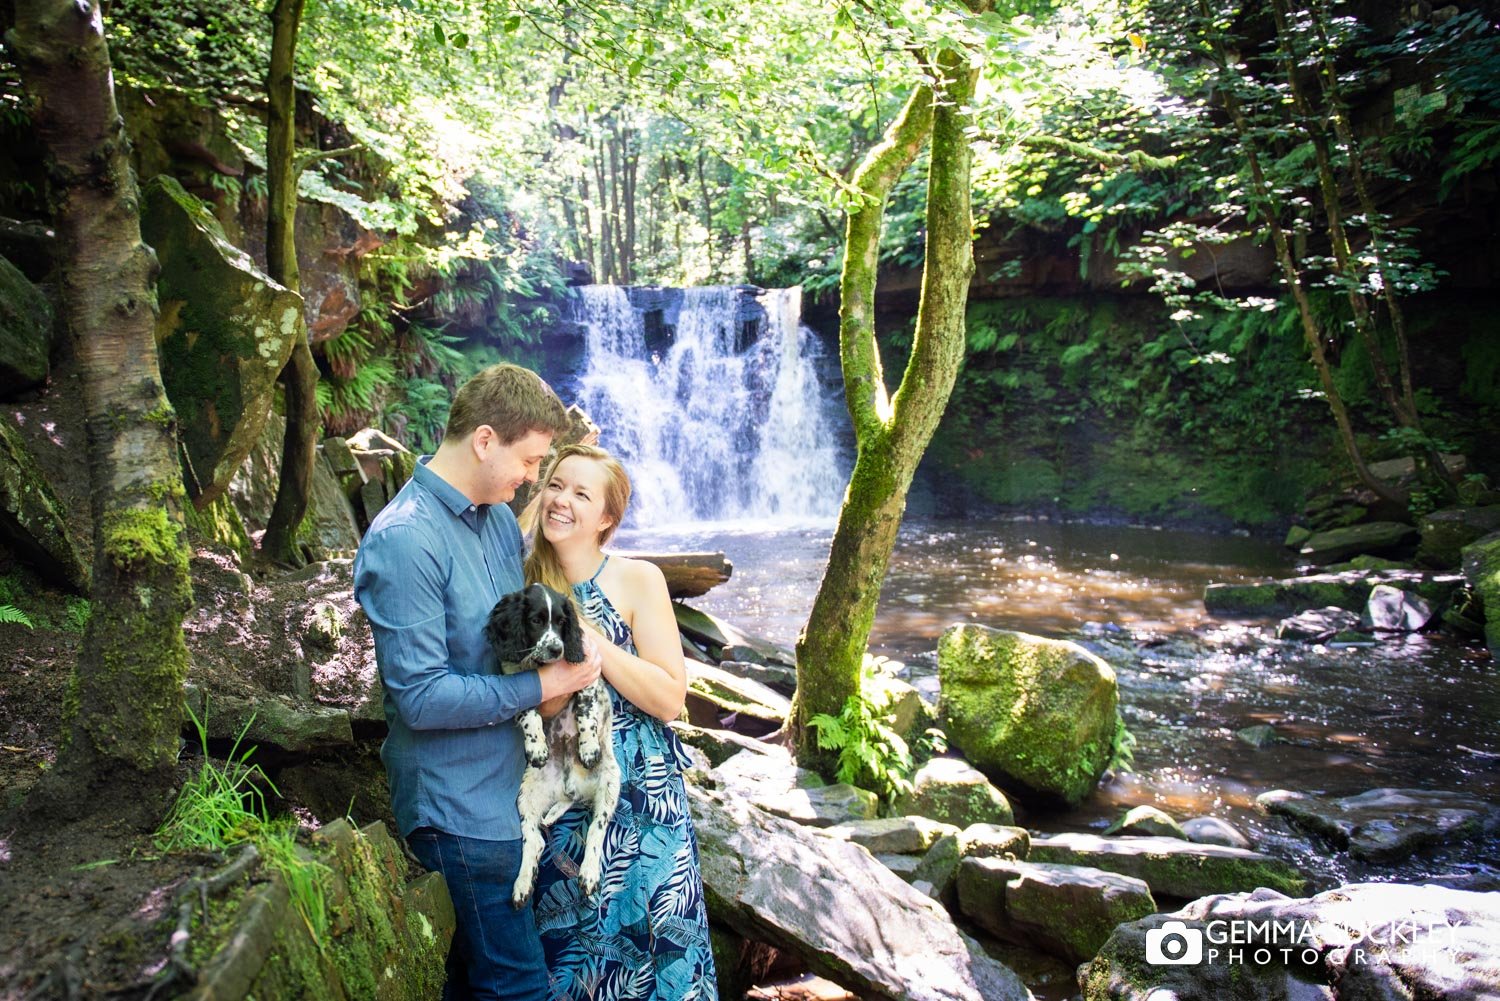 engaged coupe hugging their puppy at cullingworth waterfall